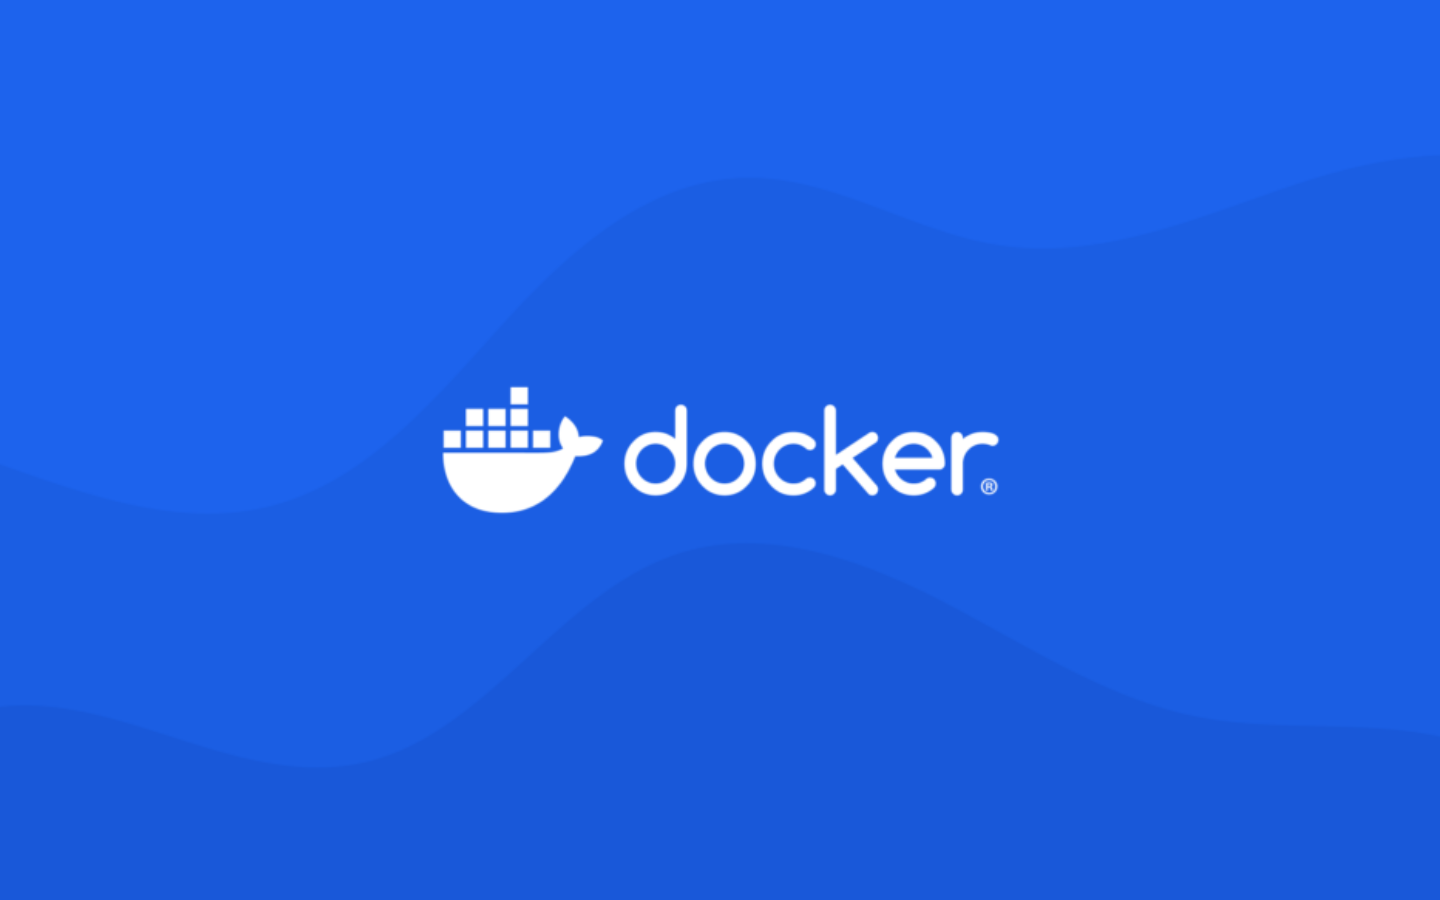 What is Docker and how to use it?